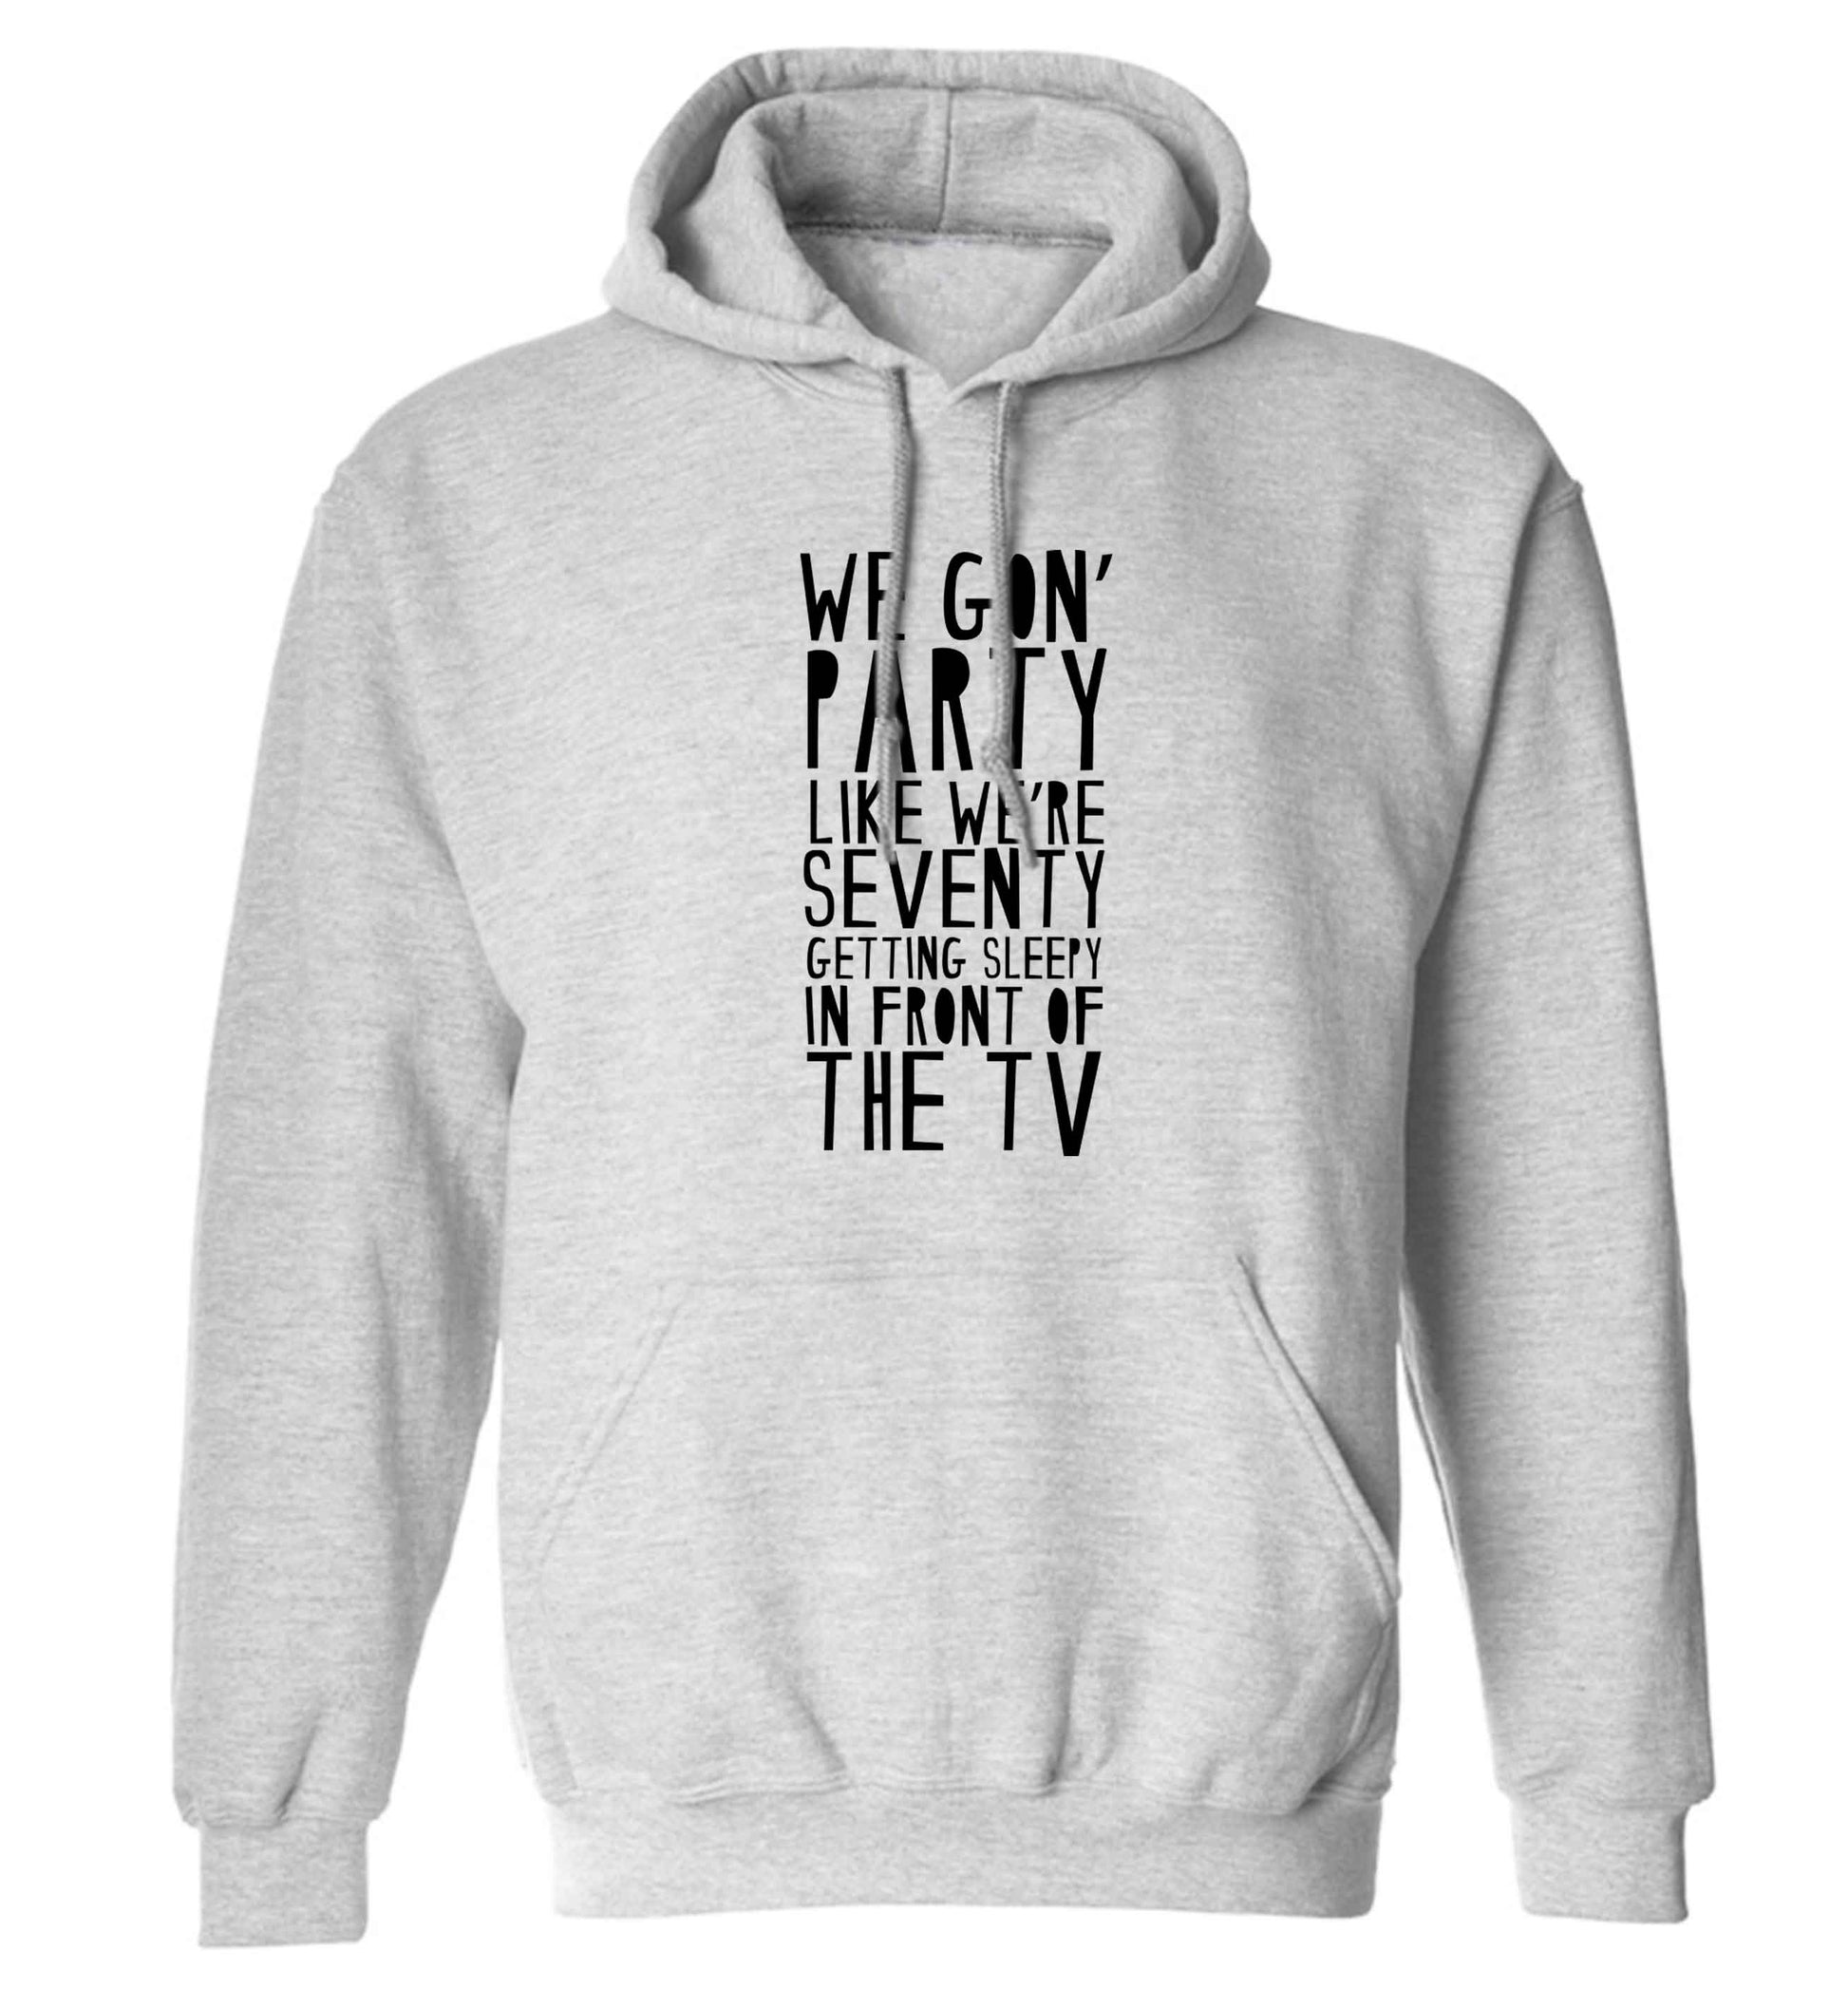 We gon' party like we're seventy getting sleepy in front of the TV adults unisex grey hoodie 2XL